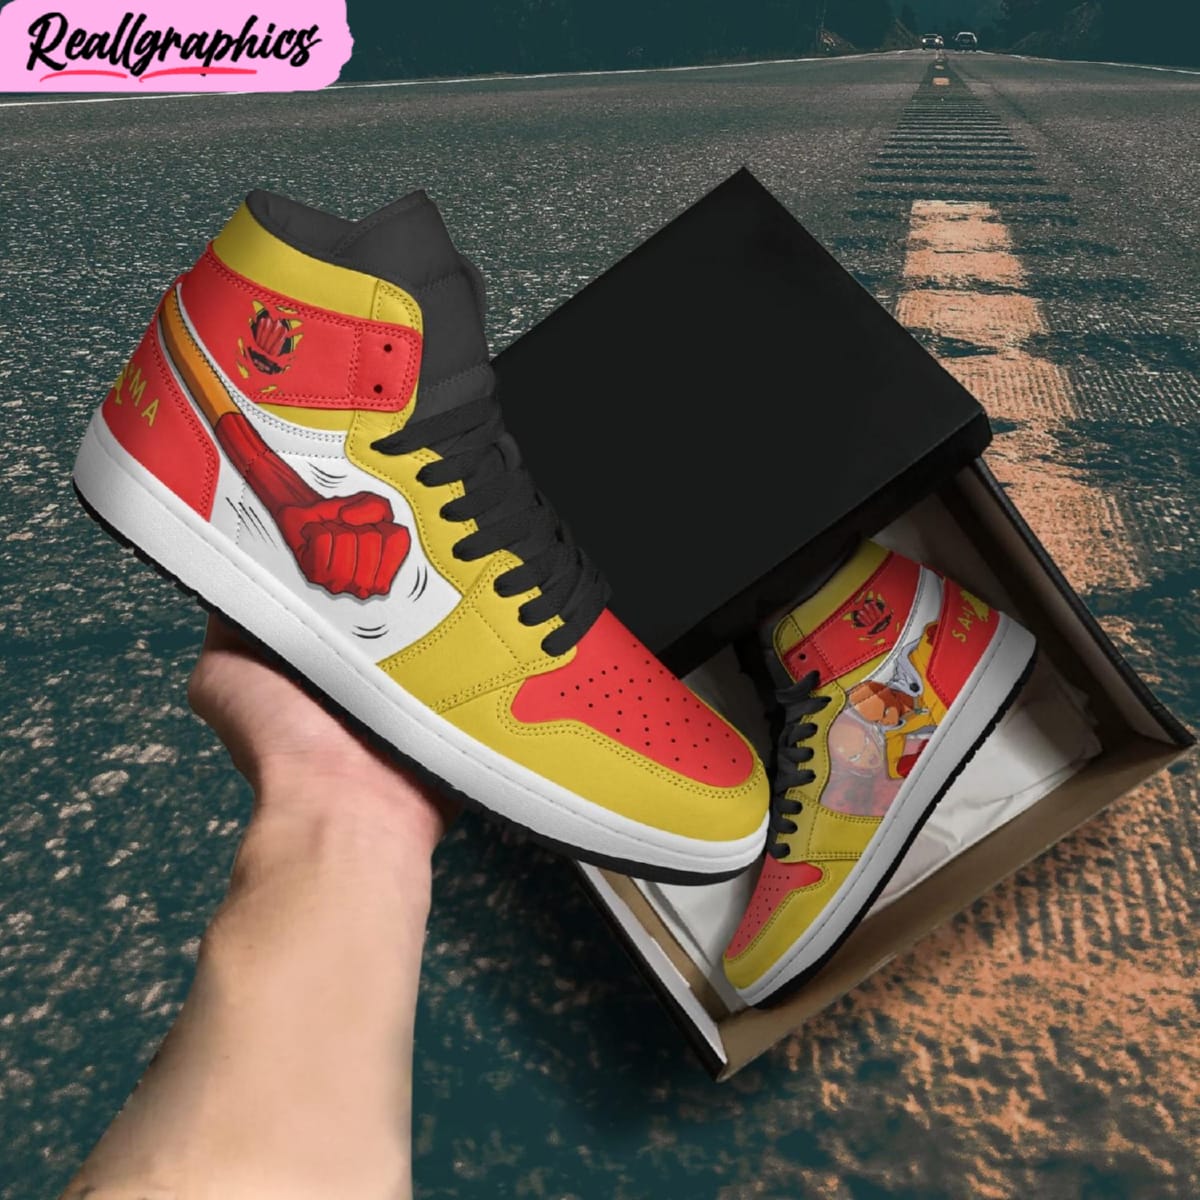 saitama jordan 1 sneaker boots, limited edition one punch man anime shoes